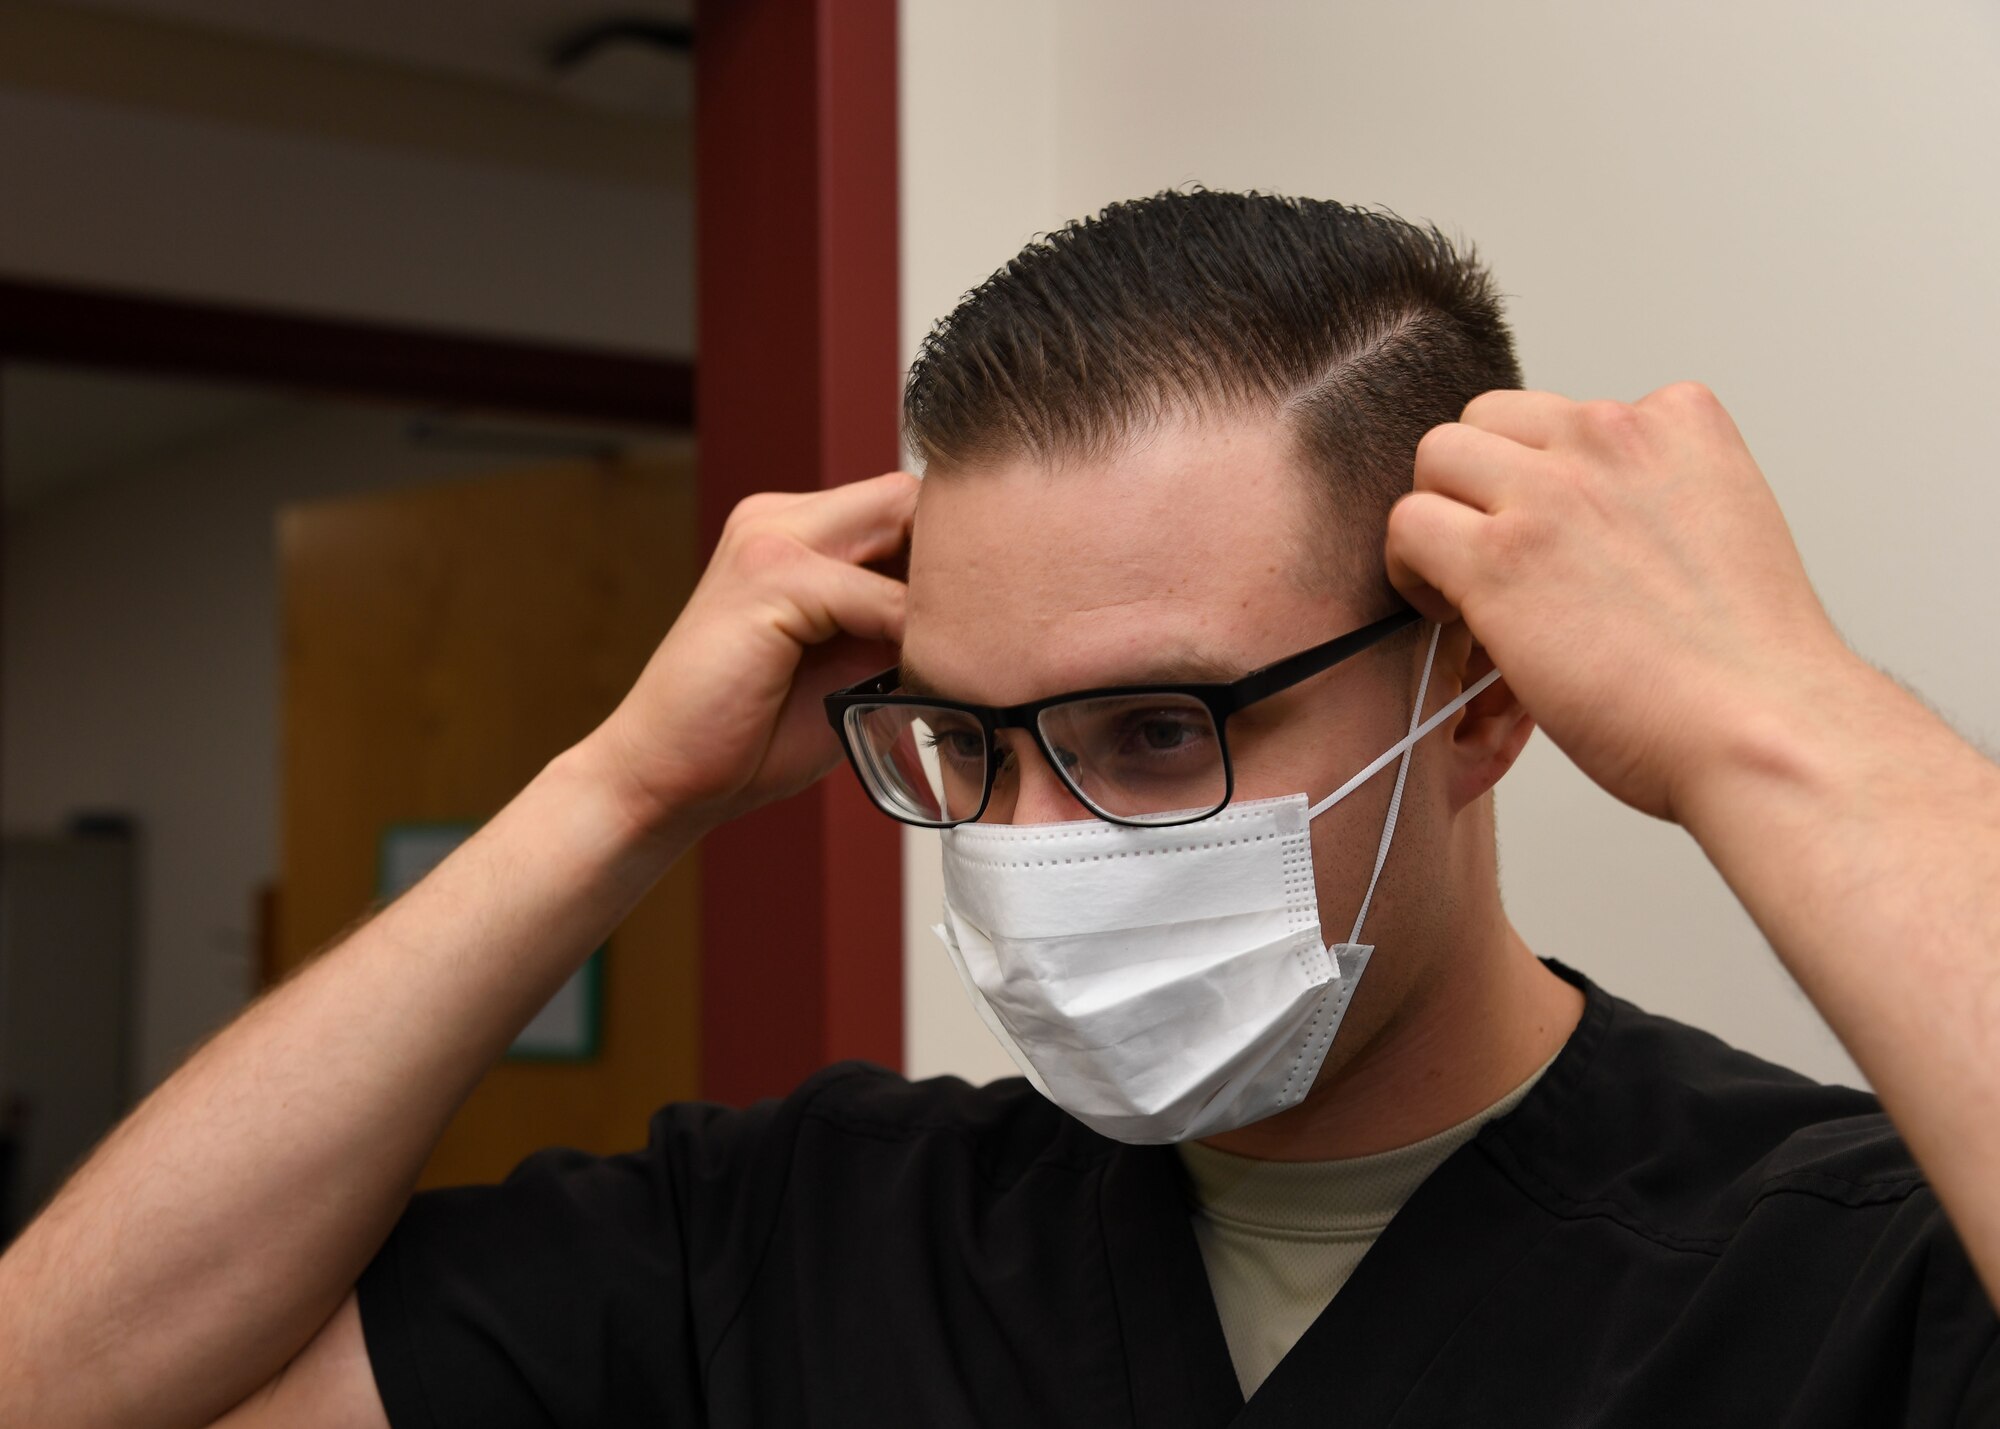 Senior Airman Alexis Lopez, dental assistant with the 319th Medical Group, demonstrates proper sanitary procedure by putting on a face mask at the medical treatment facility on Grand Forks Air Force Base, North Dakota, Sept. 7, 2017. Lopez said in addition to personal sanitation, there are also multiple steps taken to ensure treatment rooms are sanitary and prepared for patient use. (U.S. Air Force photo by Airman 1st Class Elora J. Martinez)